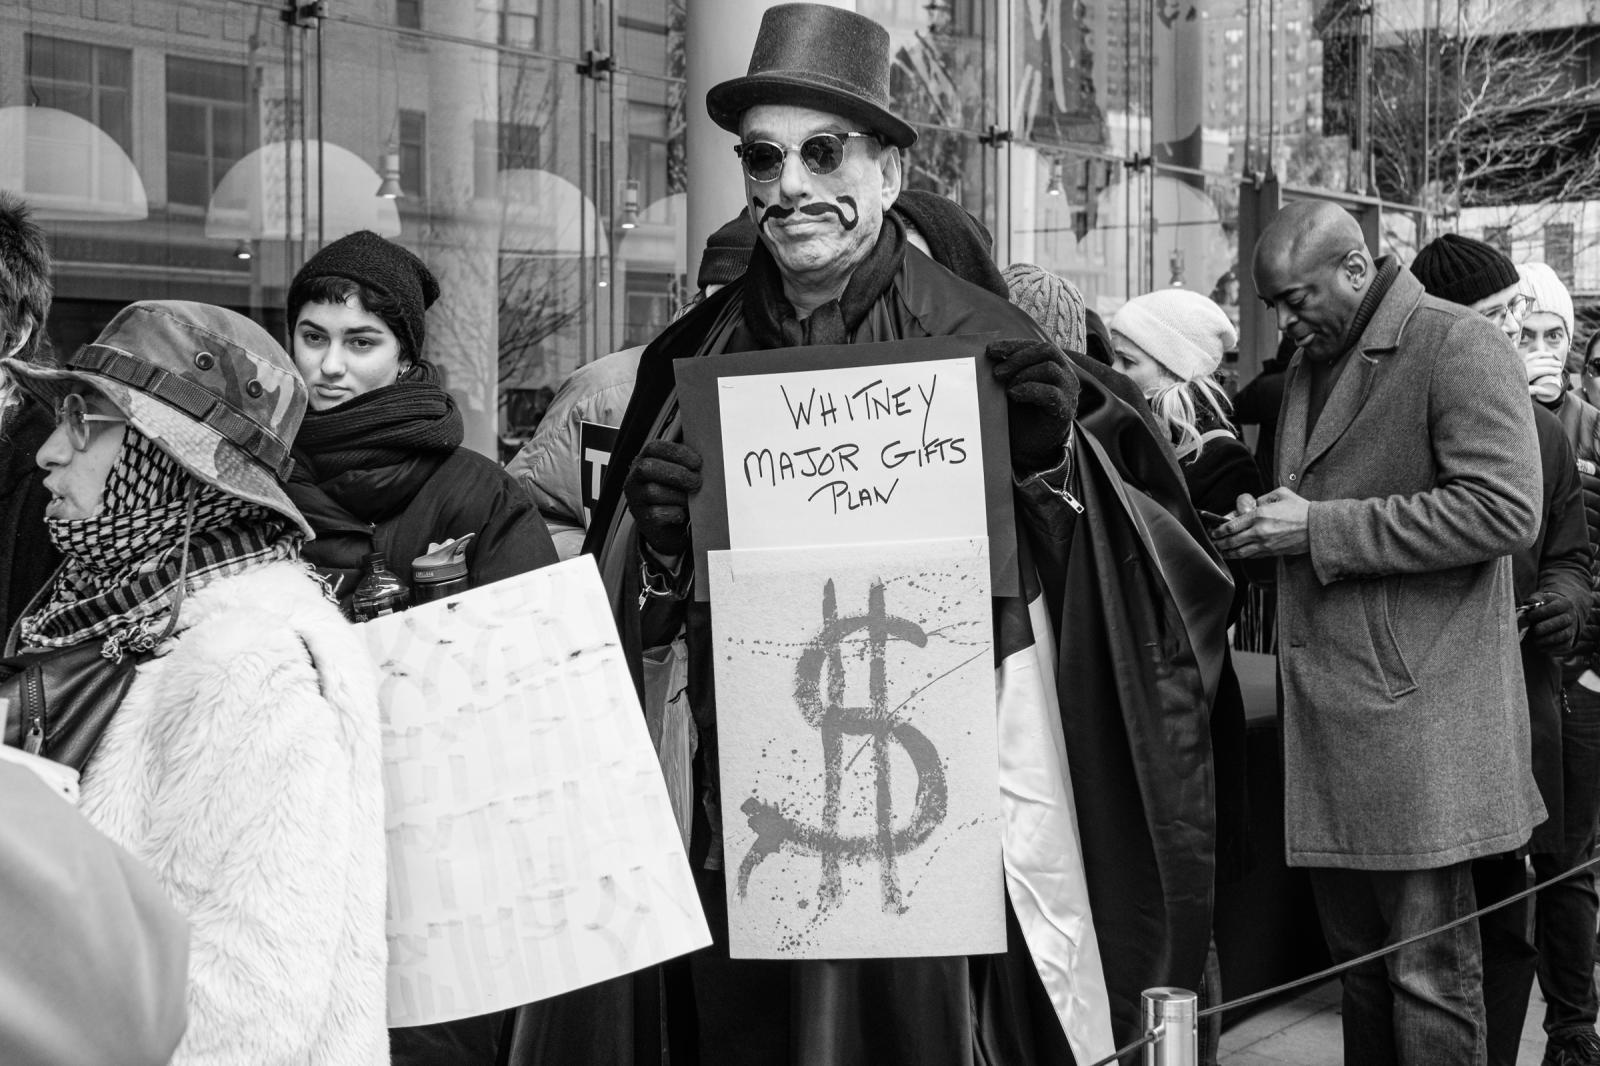 Image from  Protest Against Warren Kanders at the  Whitney Museum of American Art - The Whitney Museum of American Art, NY. 09 December 2018